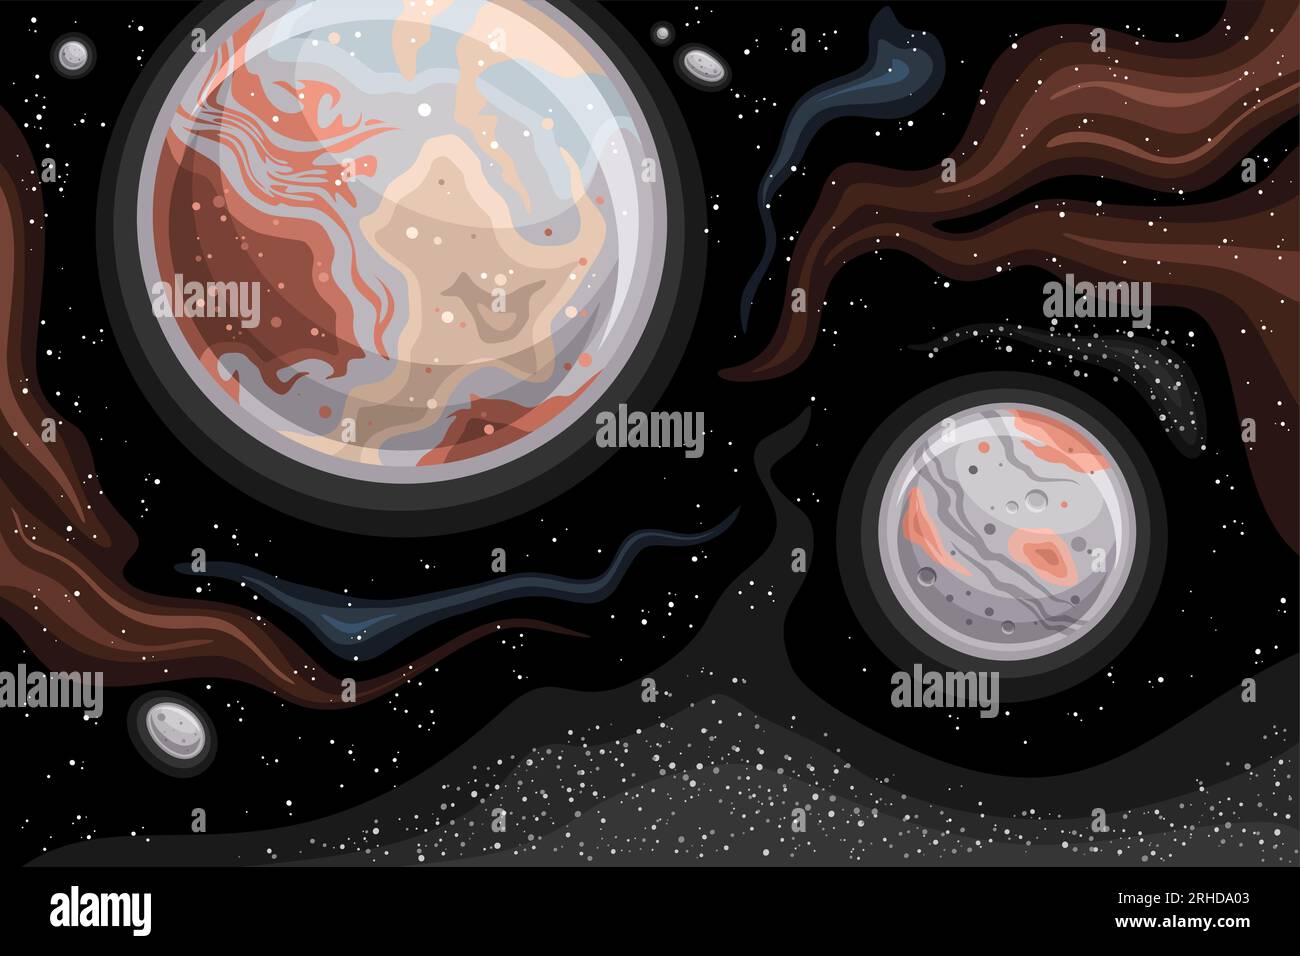 Vector Fantasy Space Chart, astronomical horizontal poster with cartoon design dwarf planet Pluto and moon Charon in deep space, decorative colorful c Stock Vector